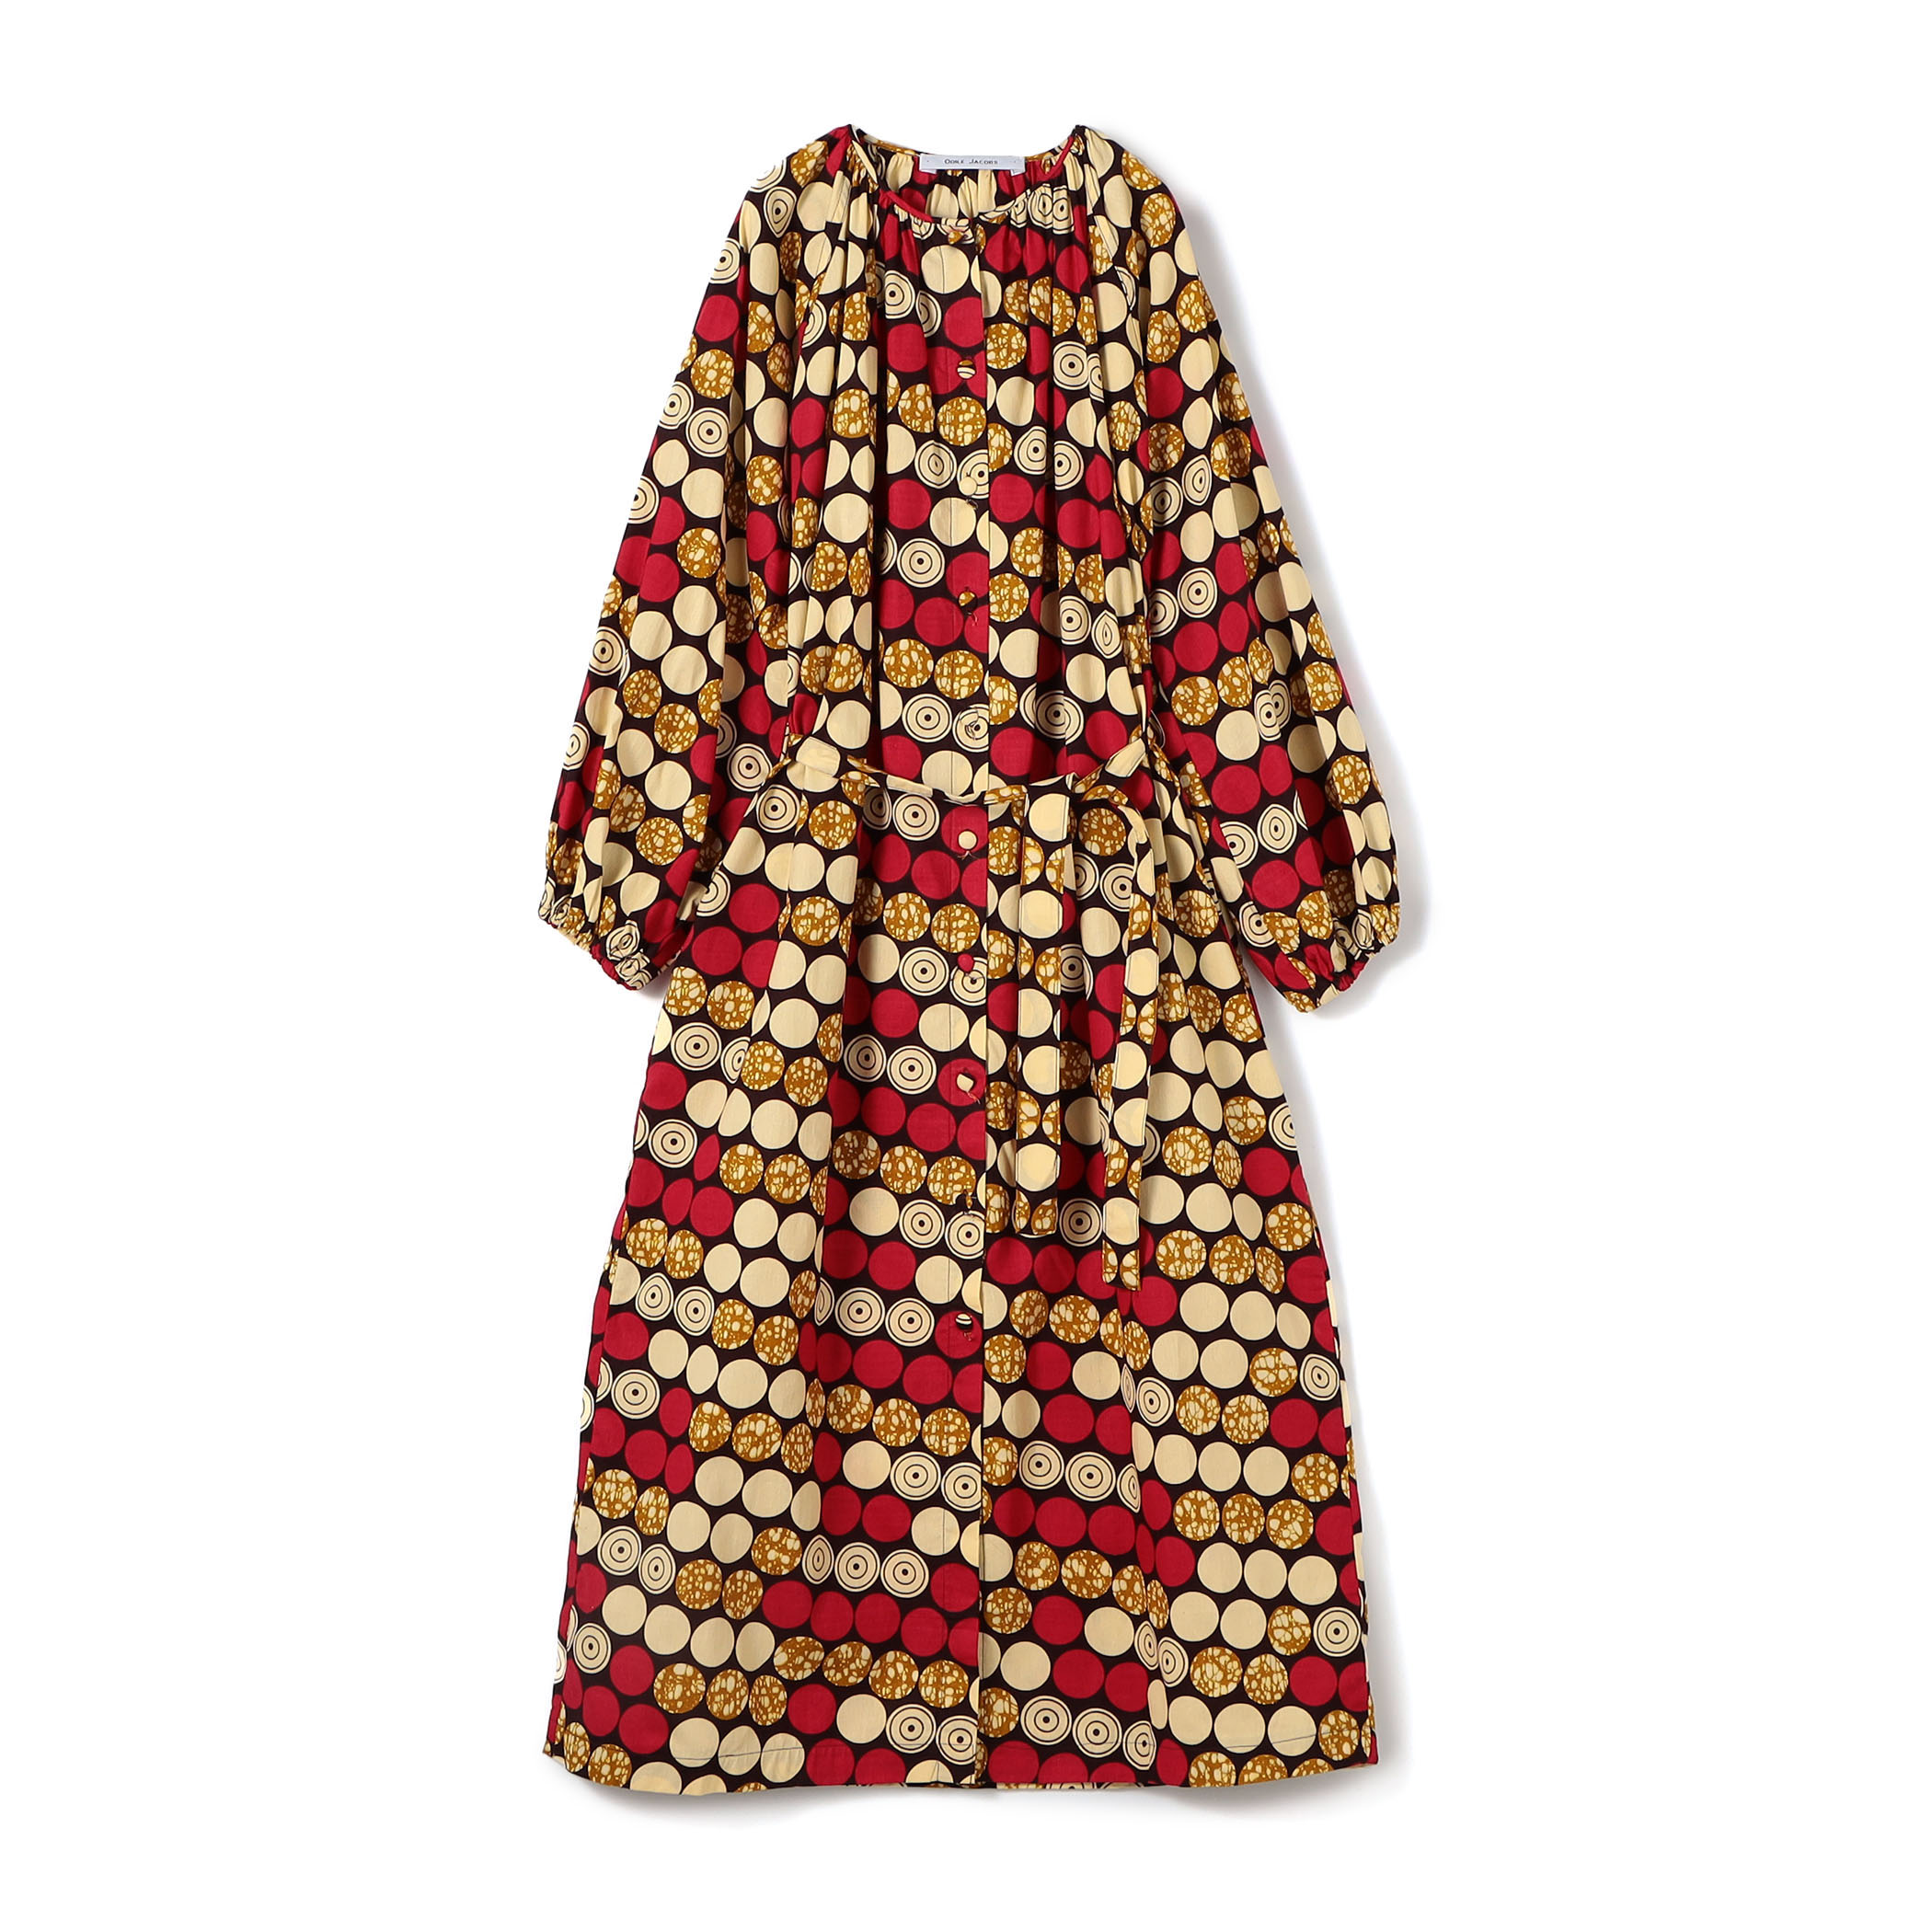 ODILE JACOBS wax cotton button dress コットン ワンピース 